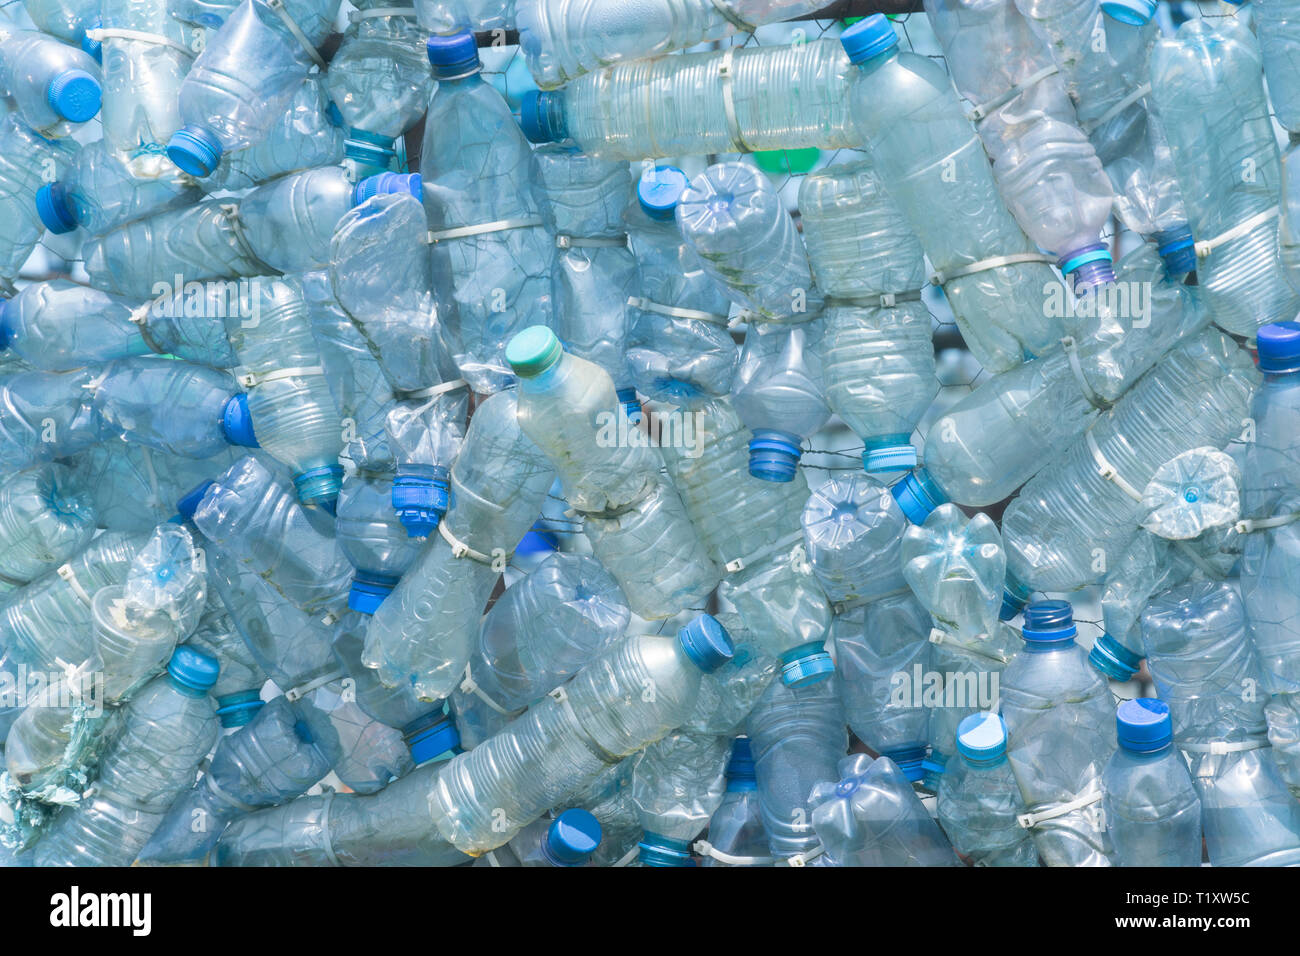 Transparent blank plastic bottles with blue lids, too much plastic waste Stock Photo